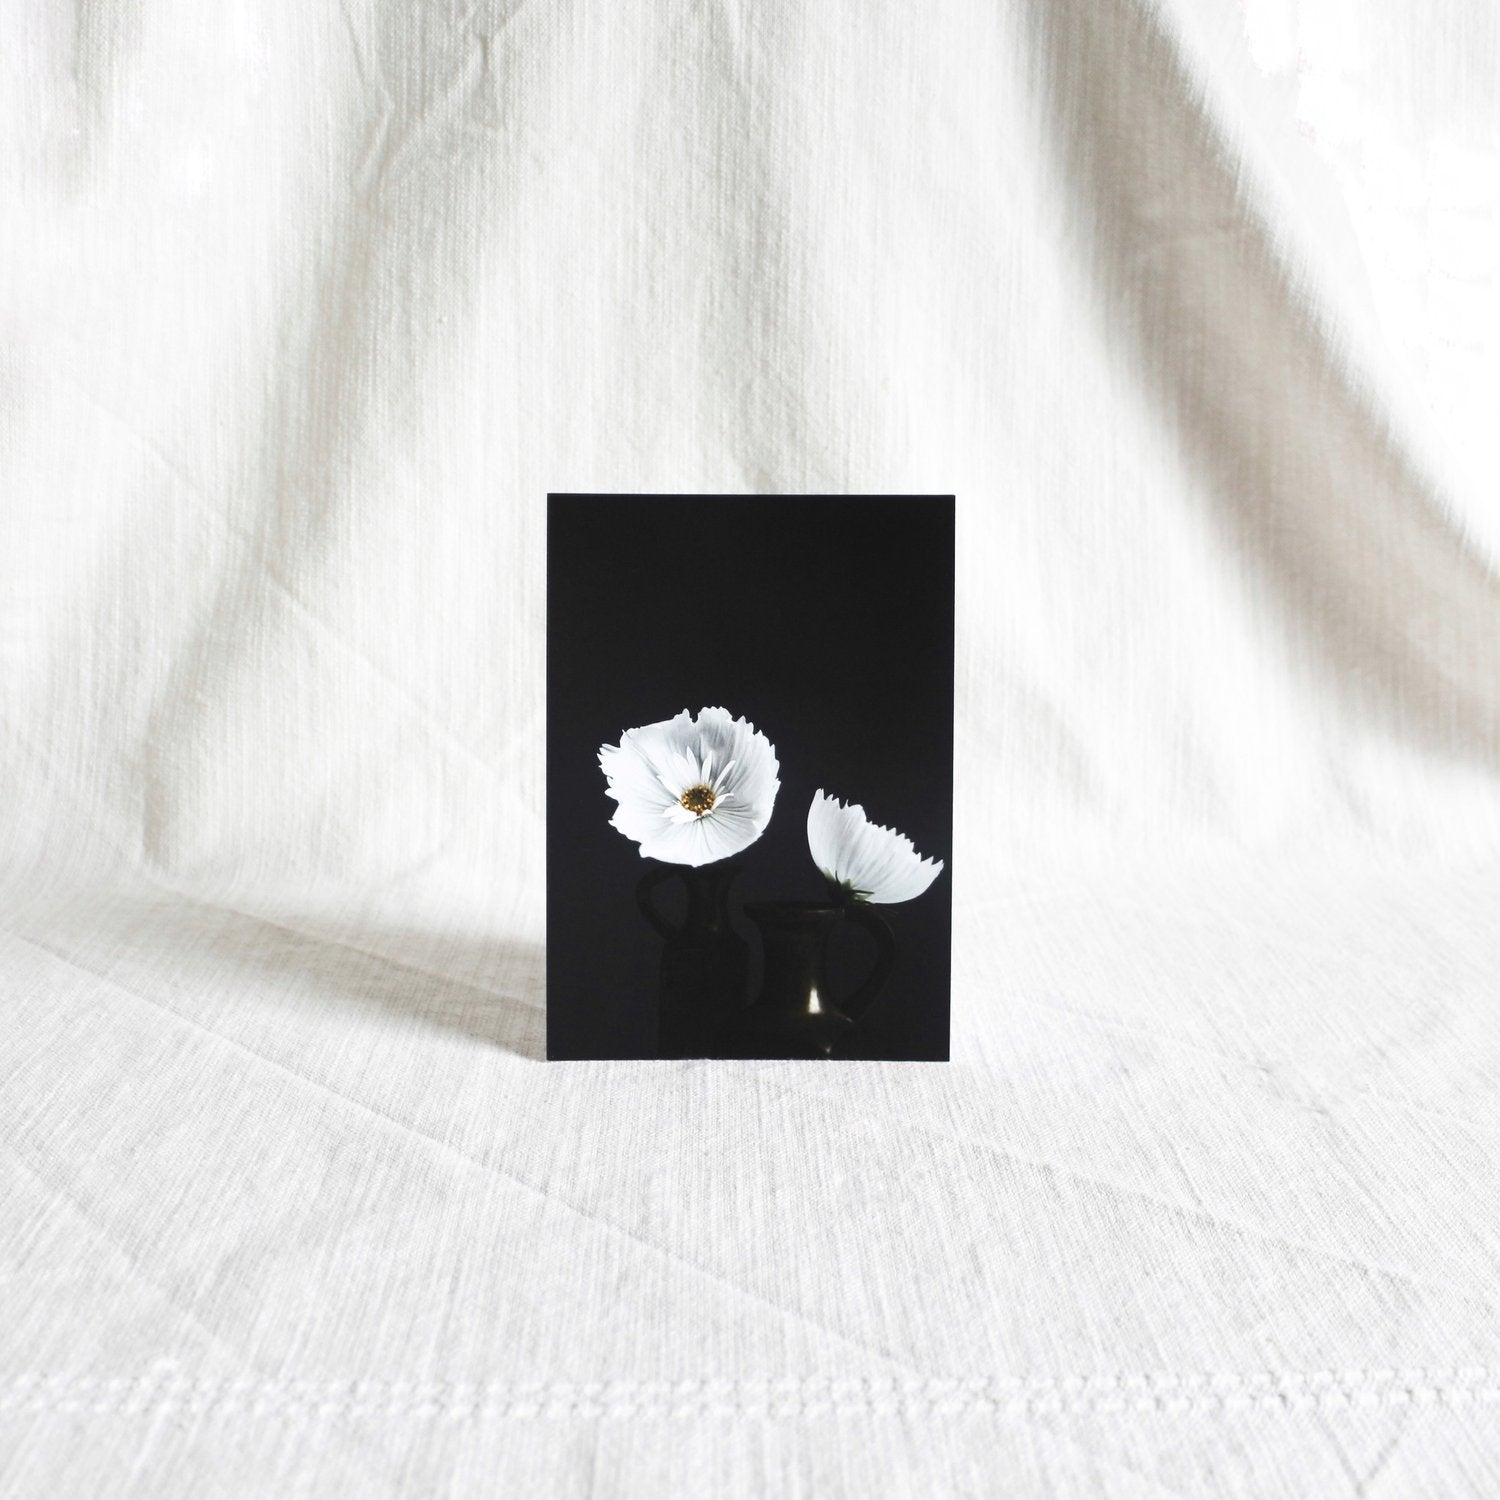 5x7 Fine Art Photography Print | "Still Life With Cupcake Cosmos No. 11"